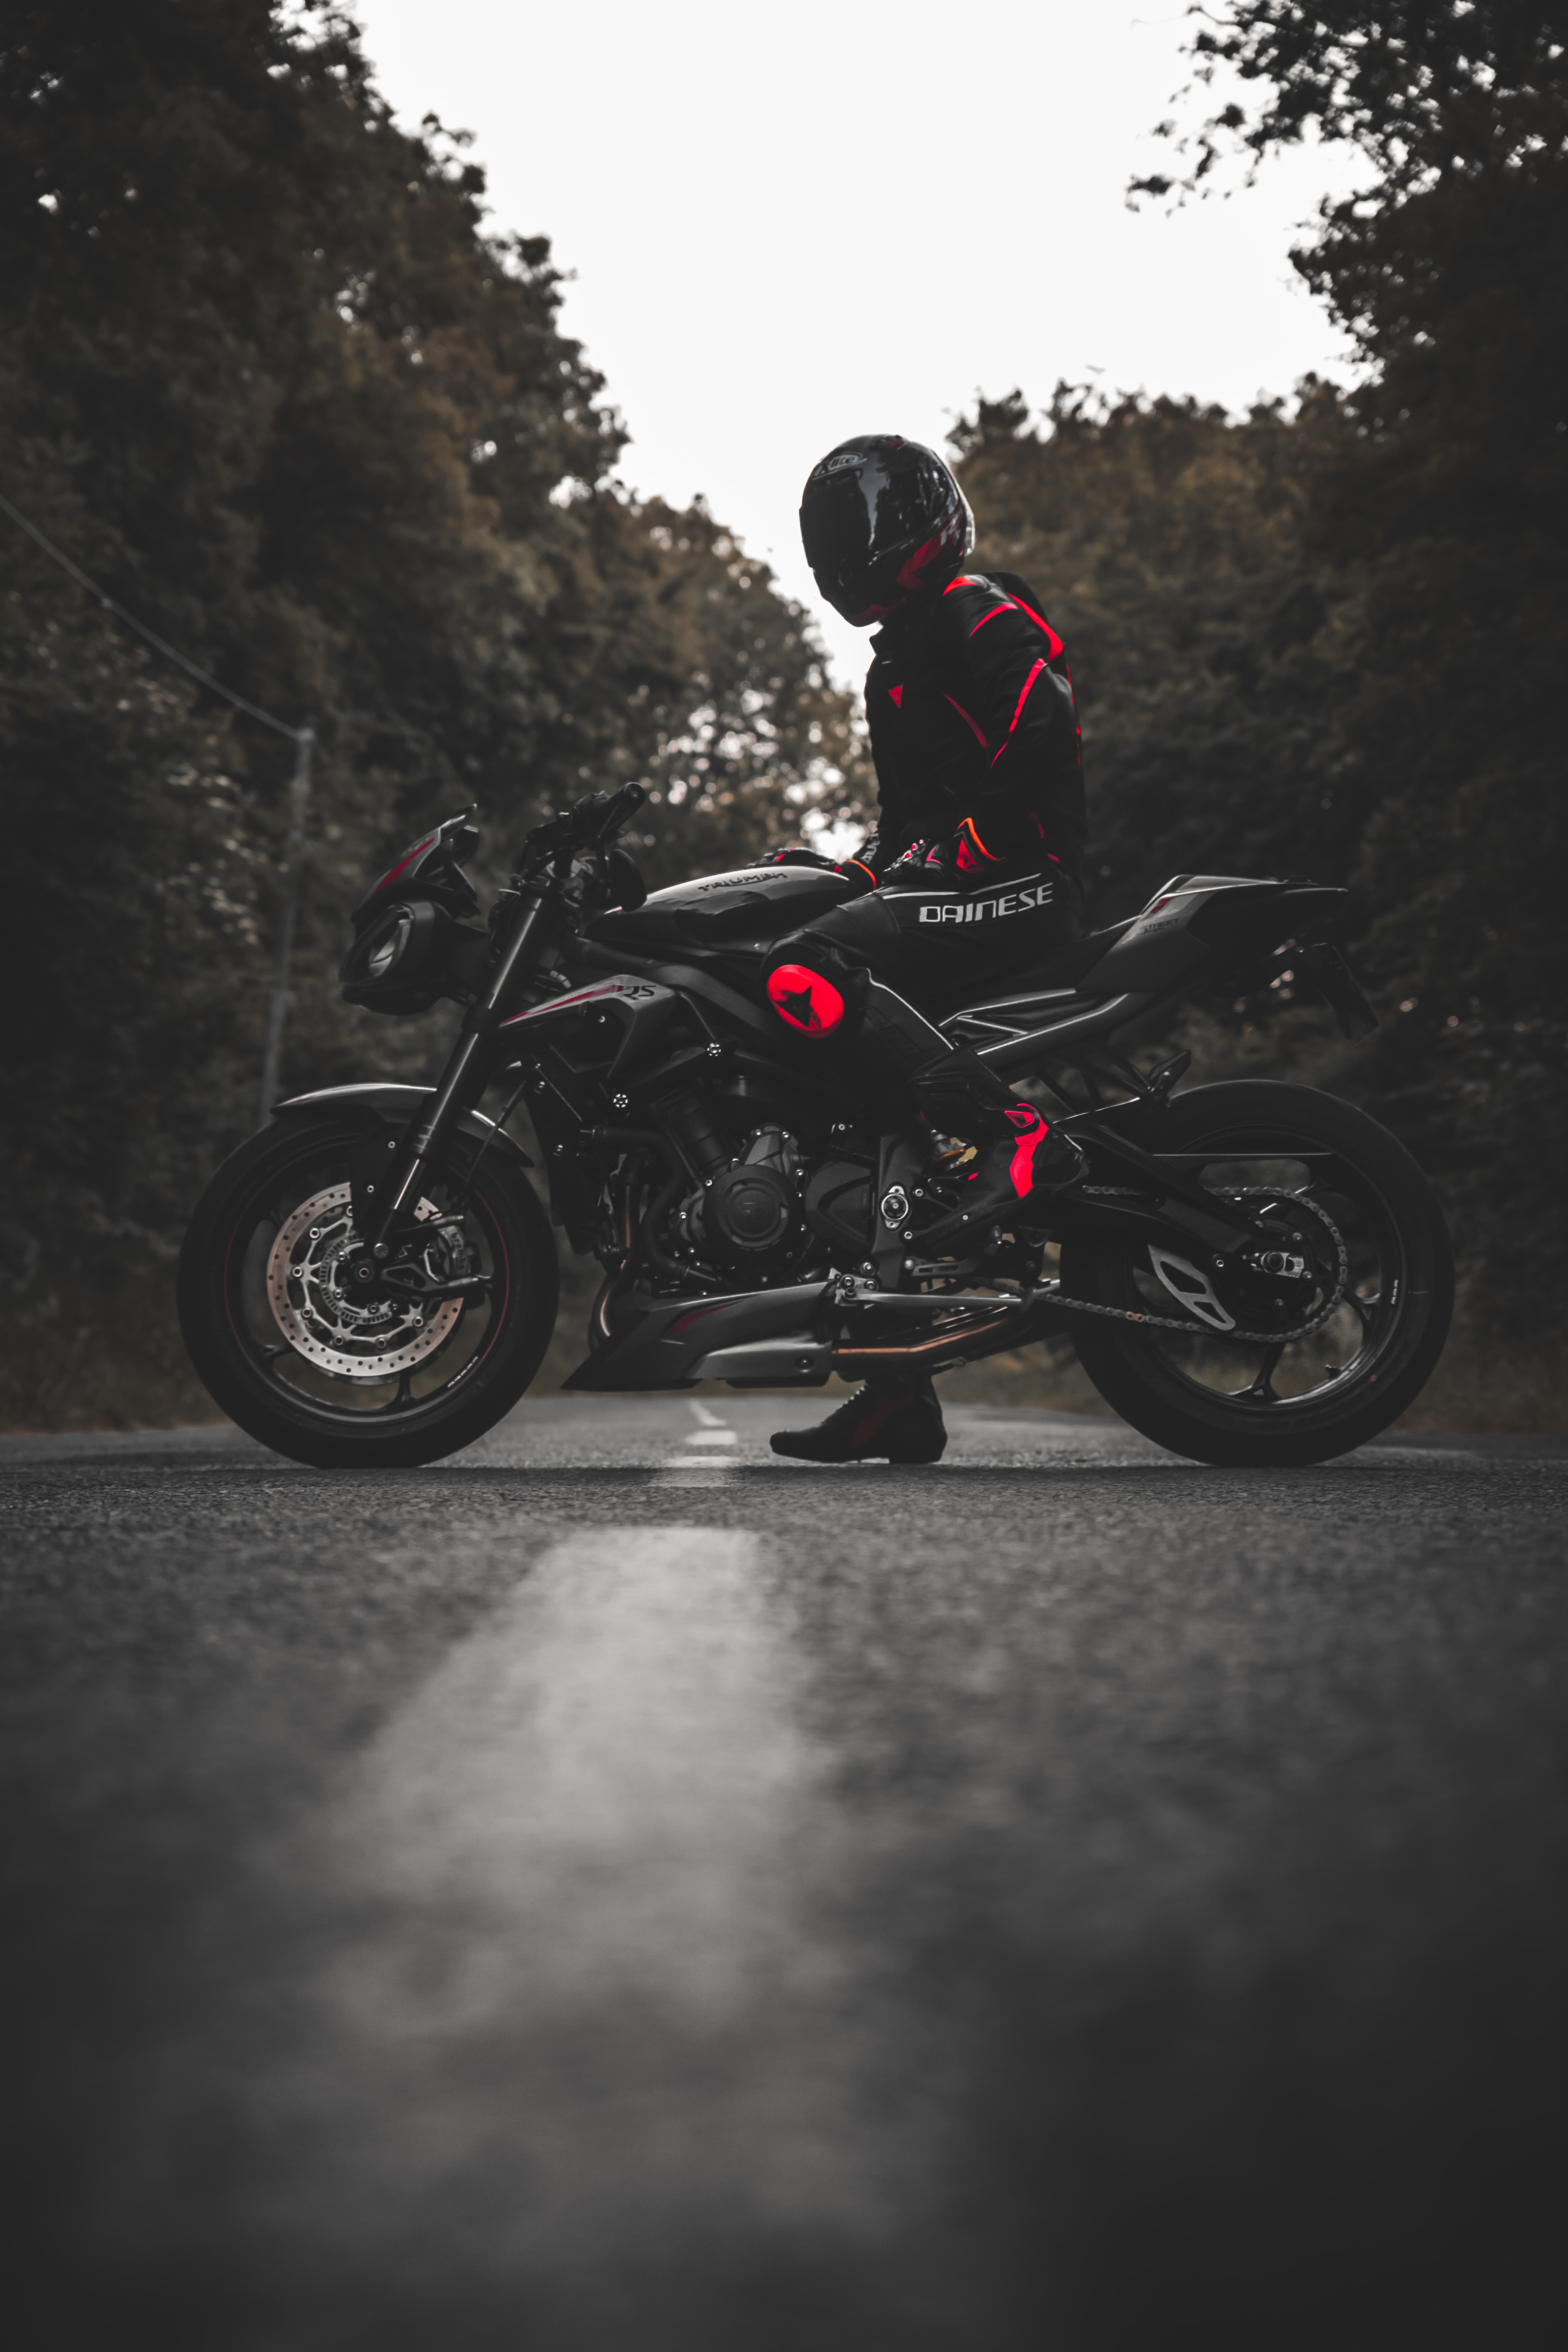 High Definition wallpaper outfit, motorcycle, motorcycles, bike